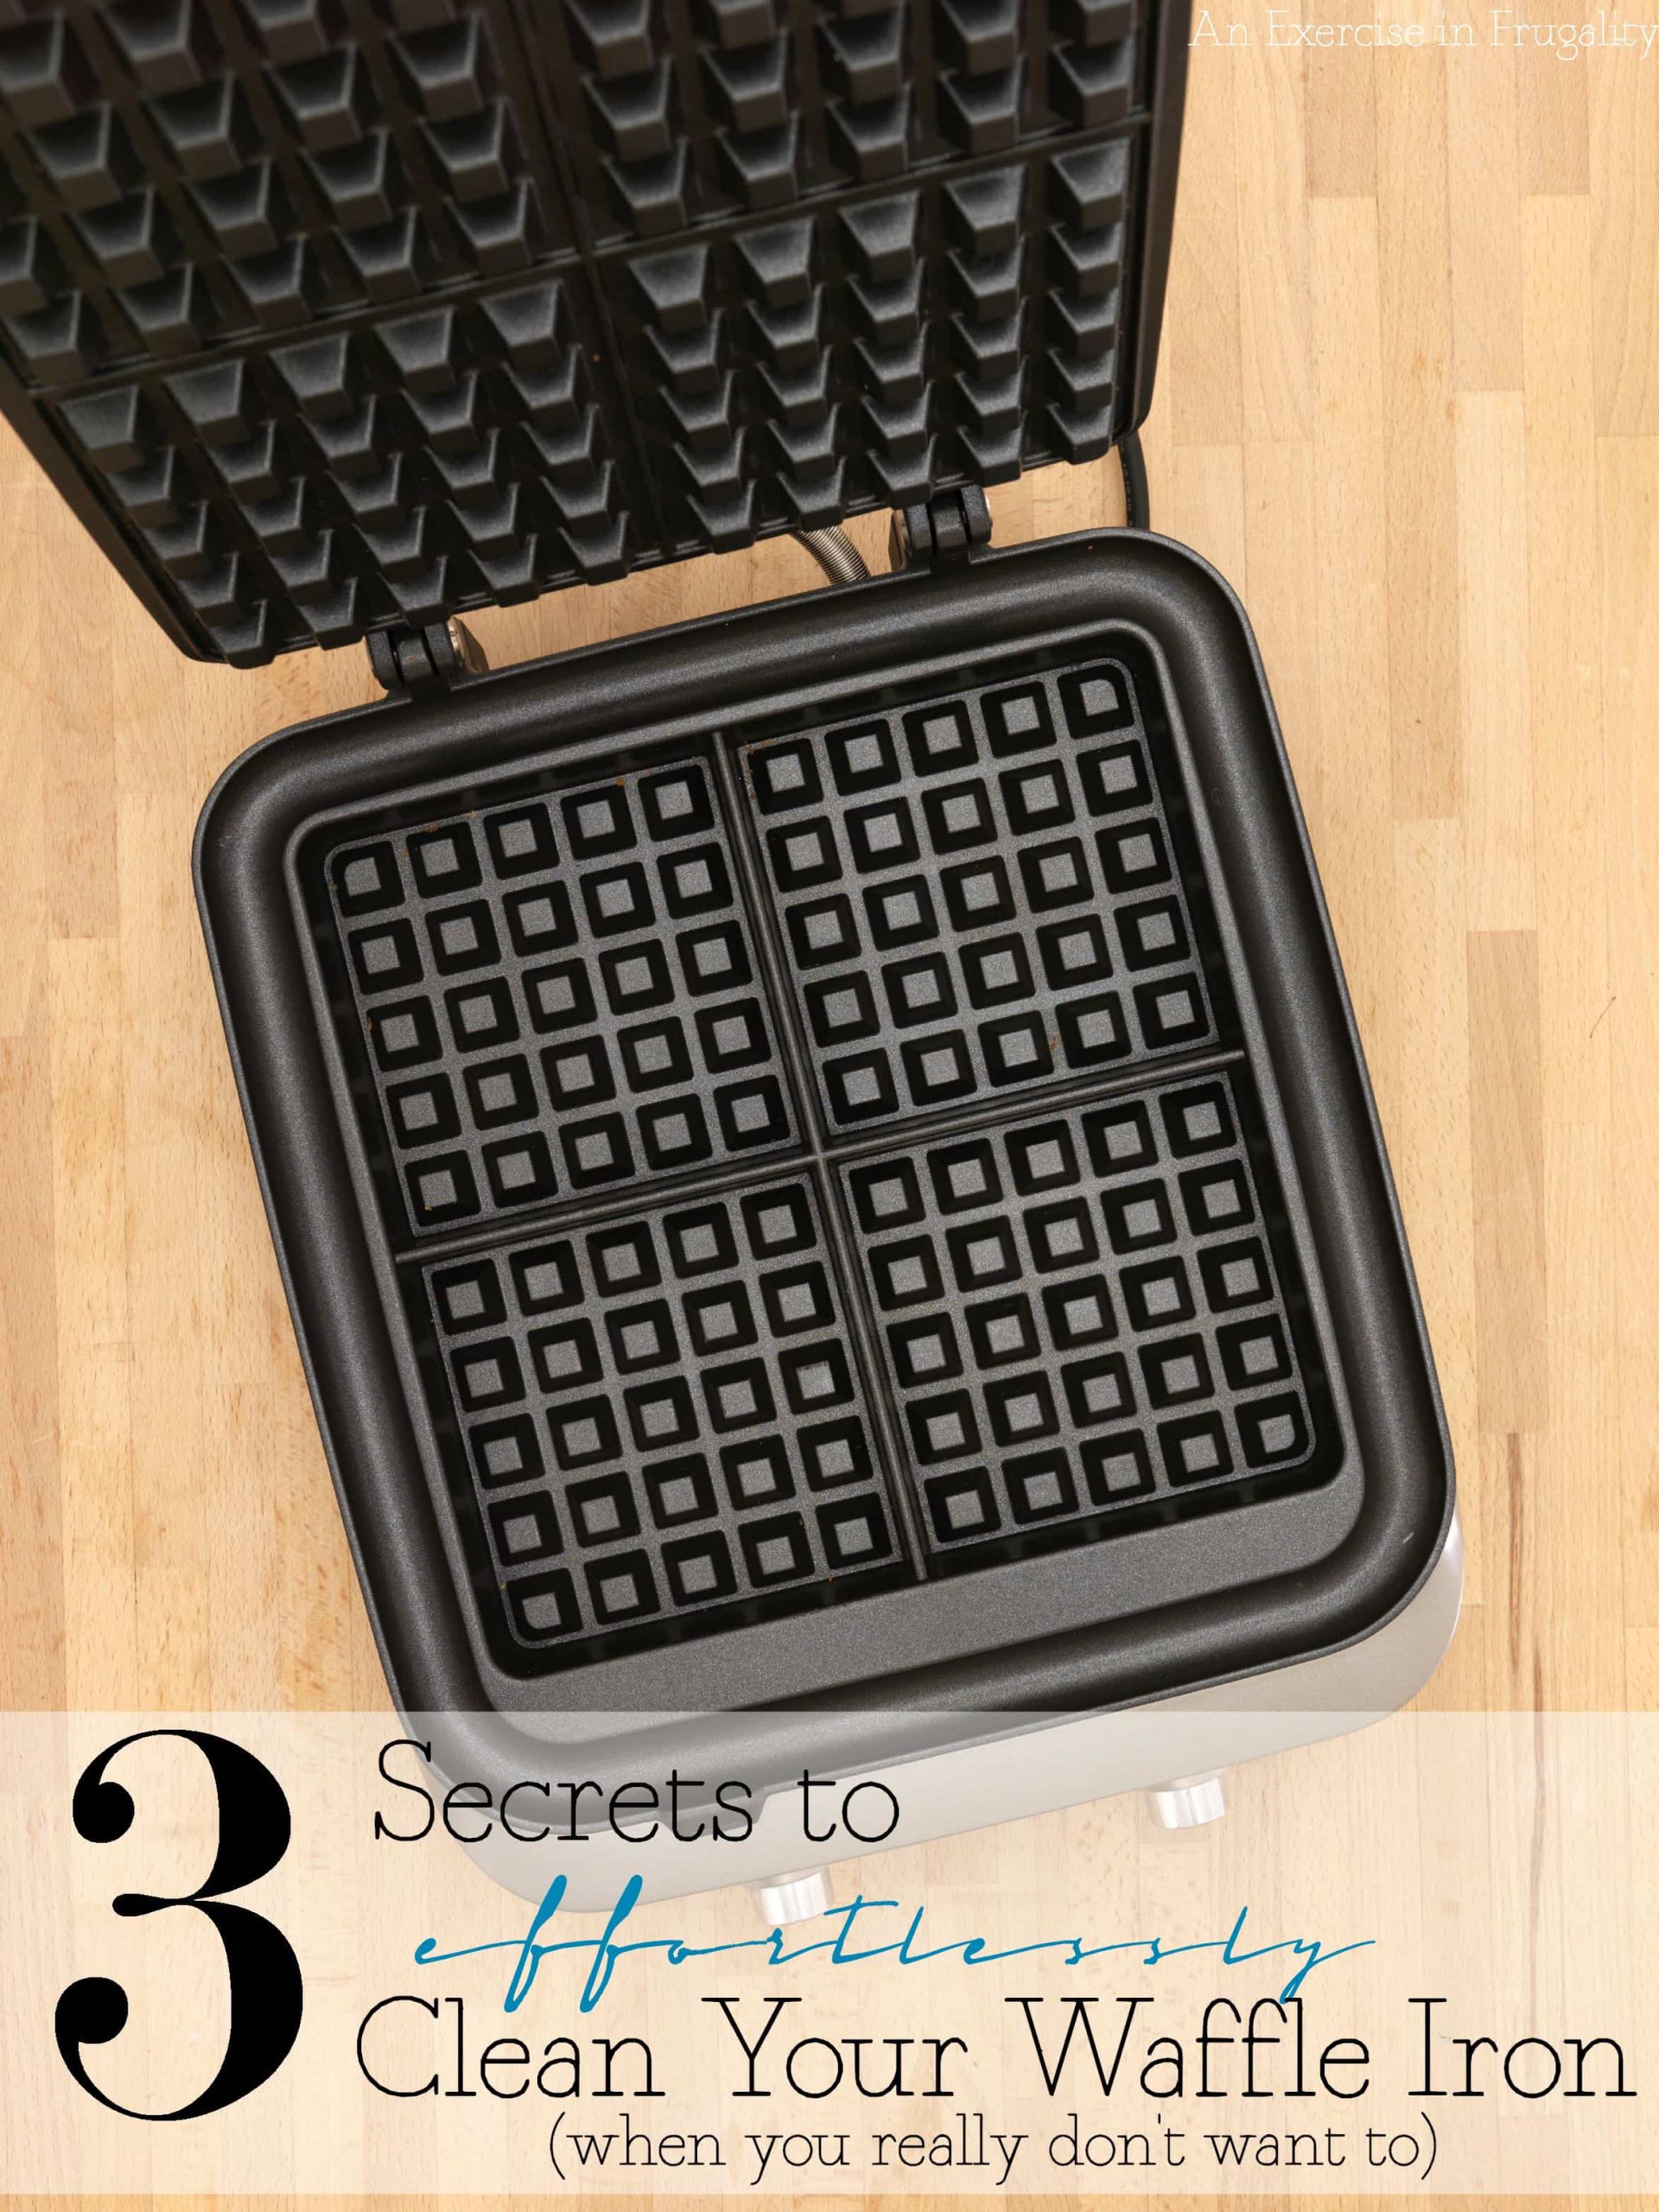 https://anexerciseinfrugality.com/wp-content/uploads/2015/09/how-to-clean-a-waffle-iron-scaled.jpg